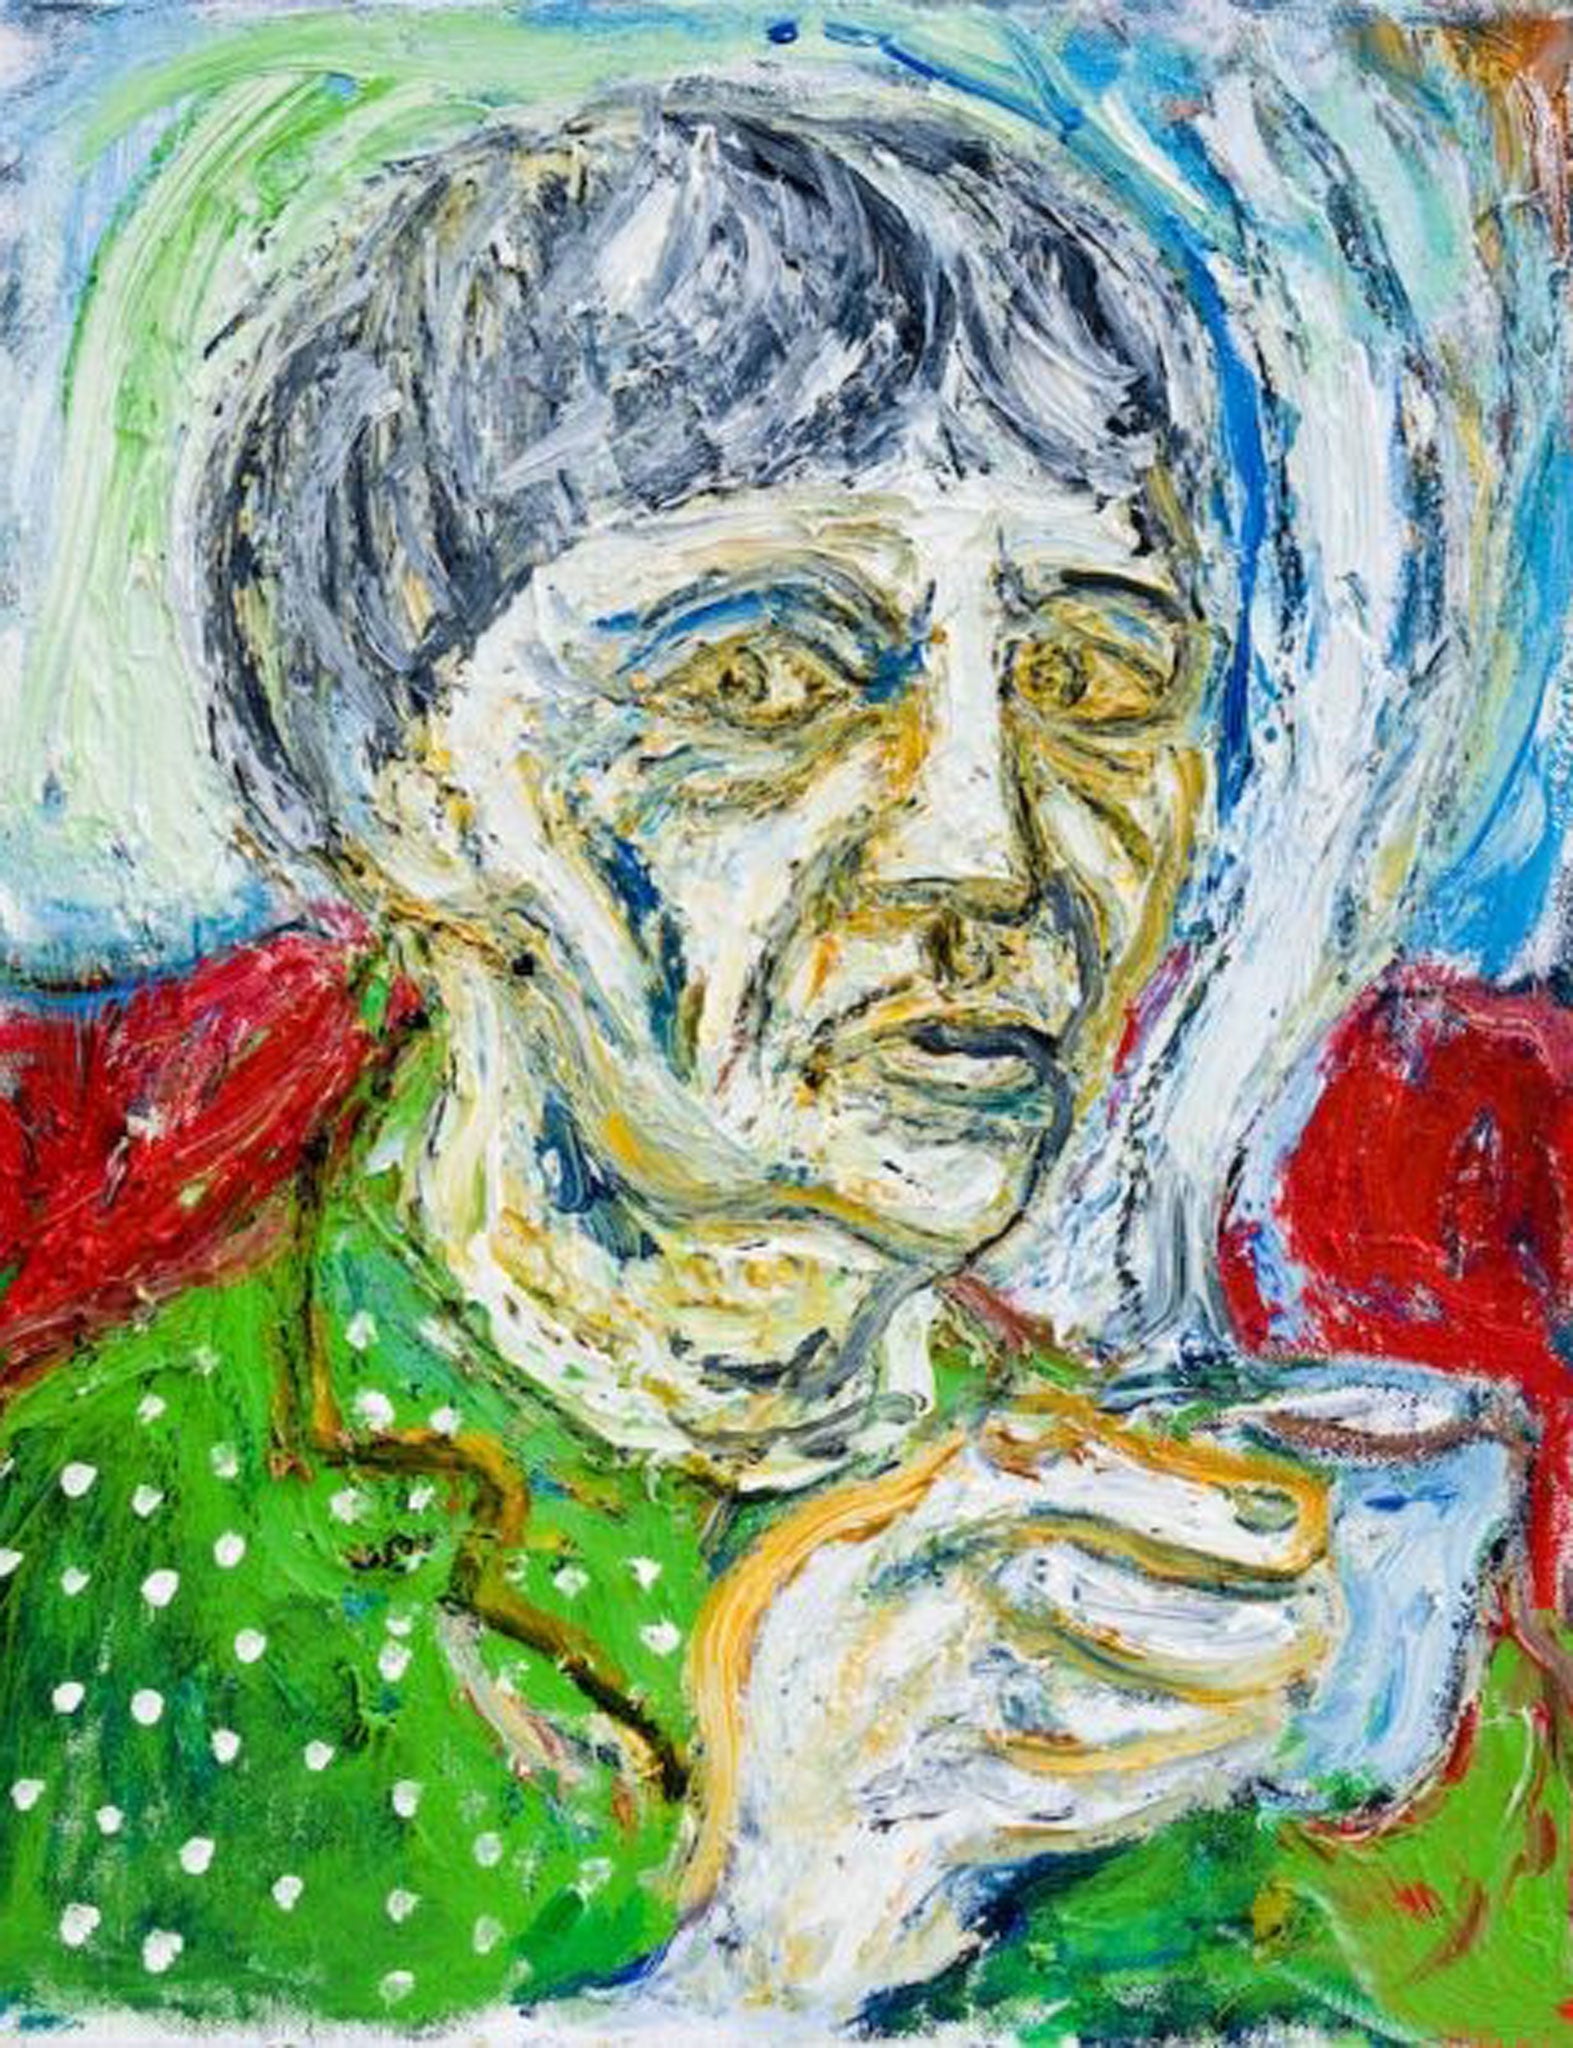 Billy Childish has used thick paint to capture his mother in his latest portrait